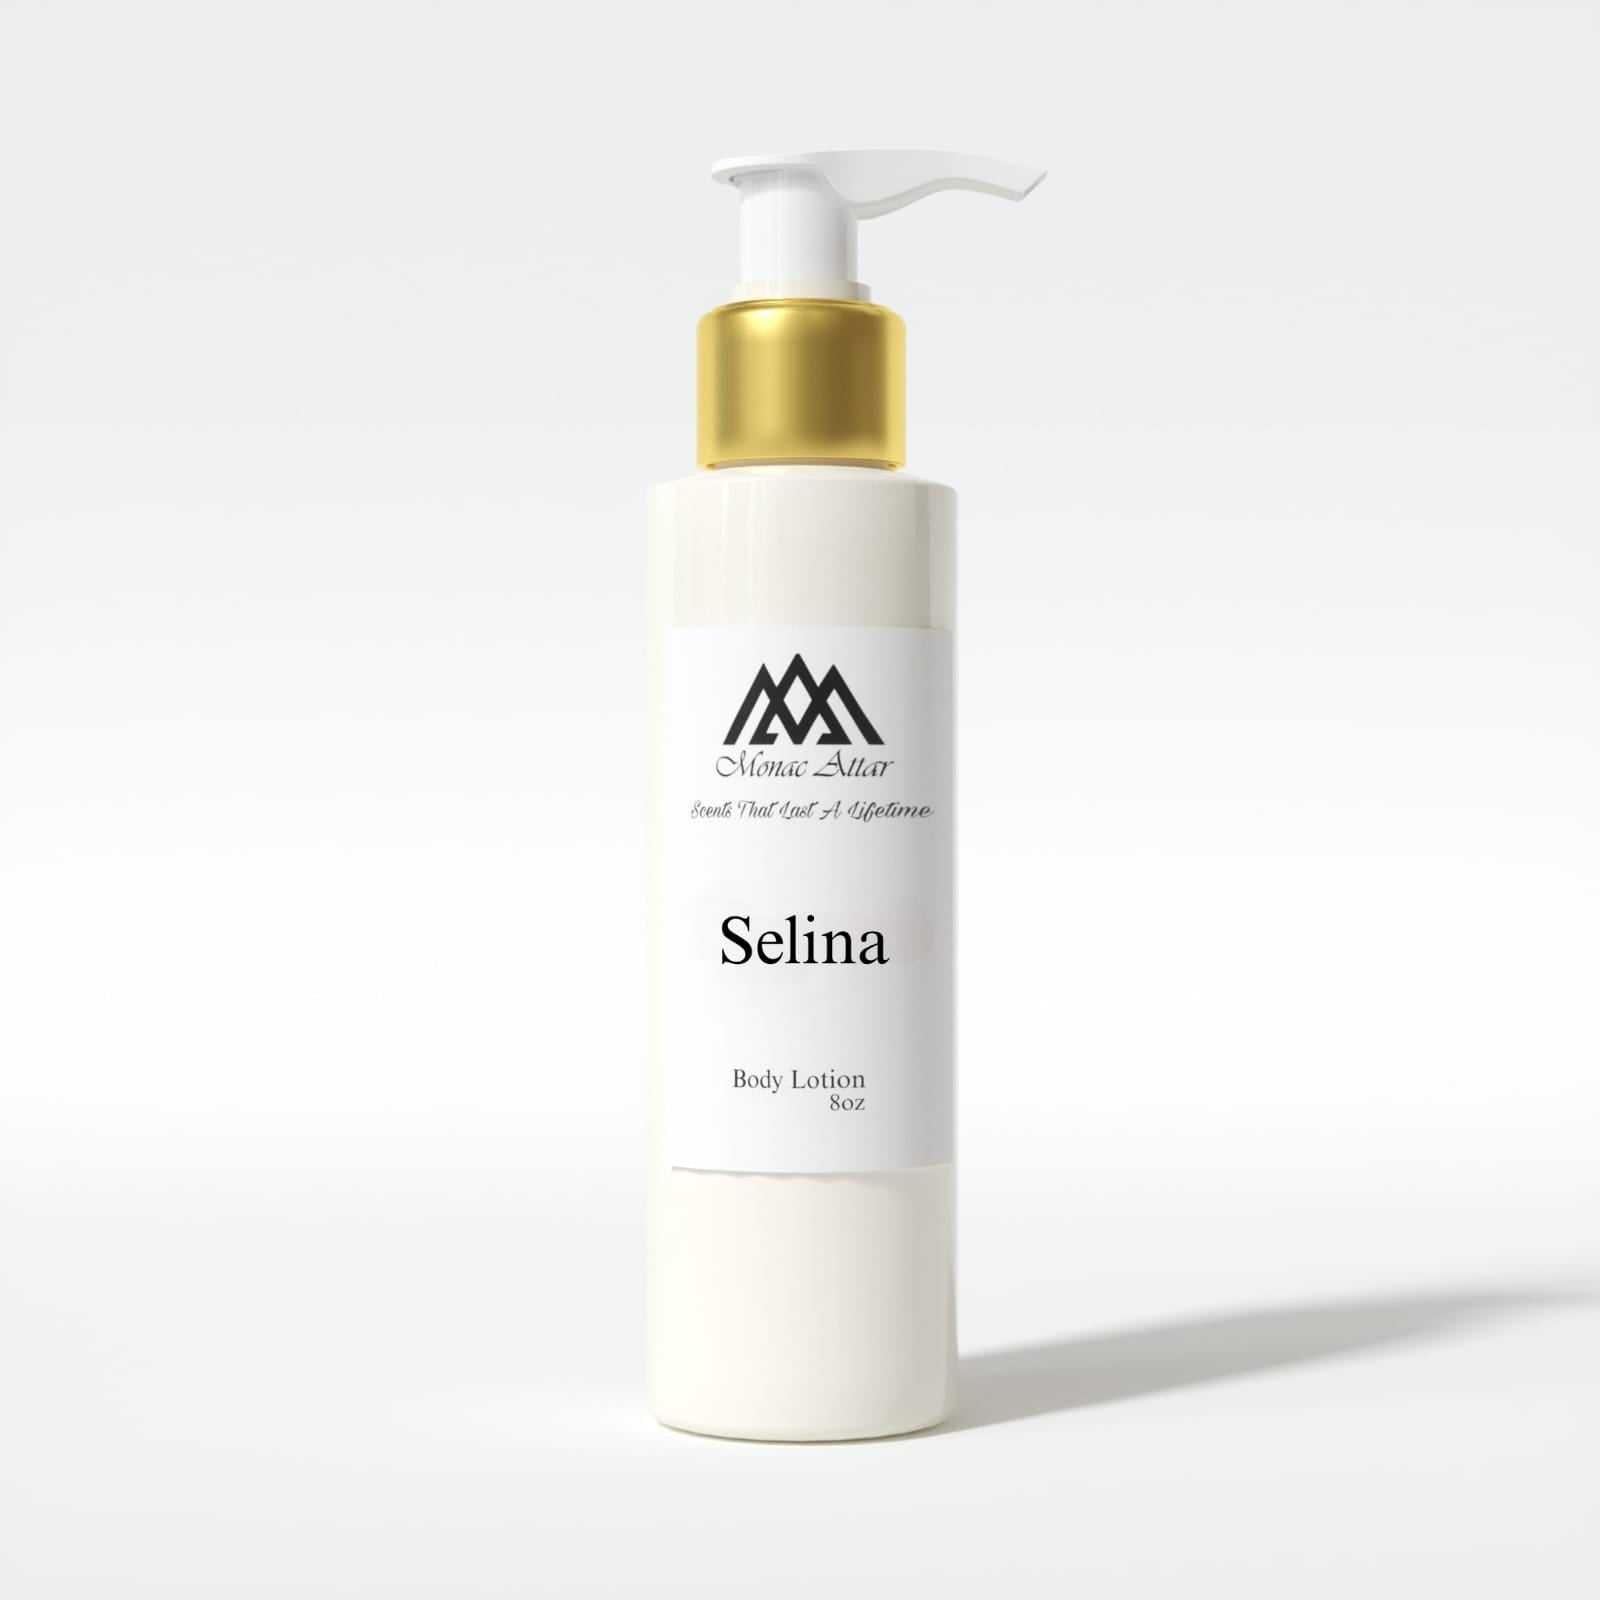 Selina Body Lotion Inspired by Parfums De Marly Delina dupe